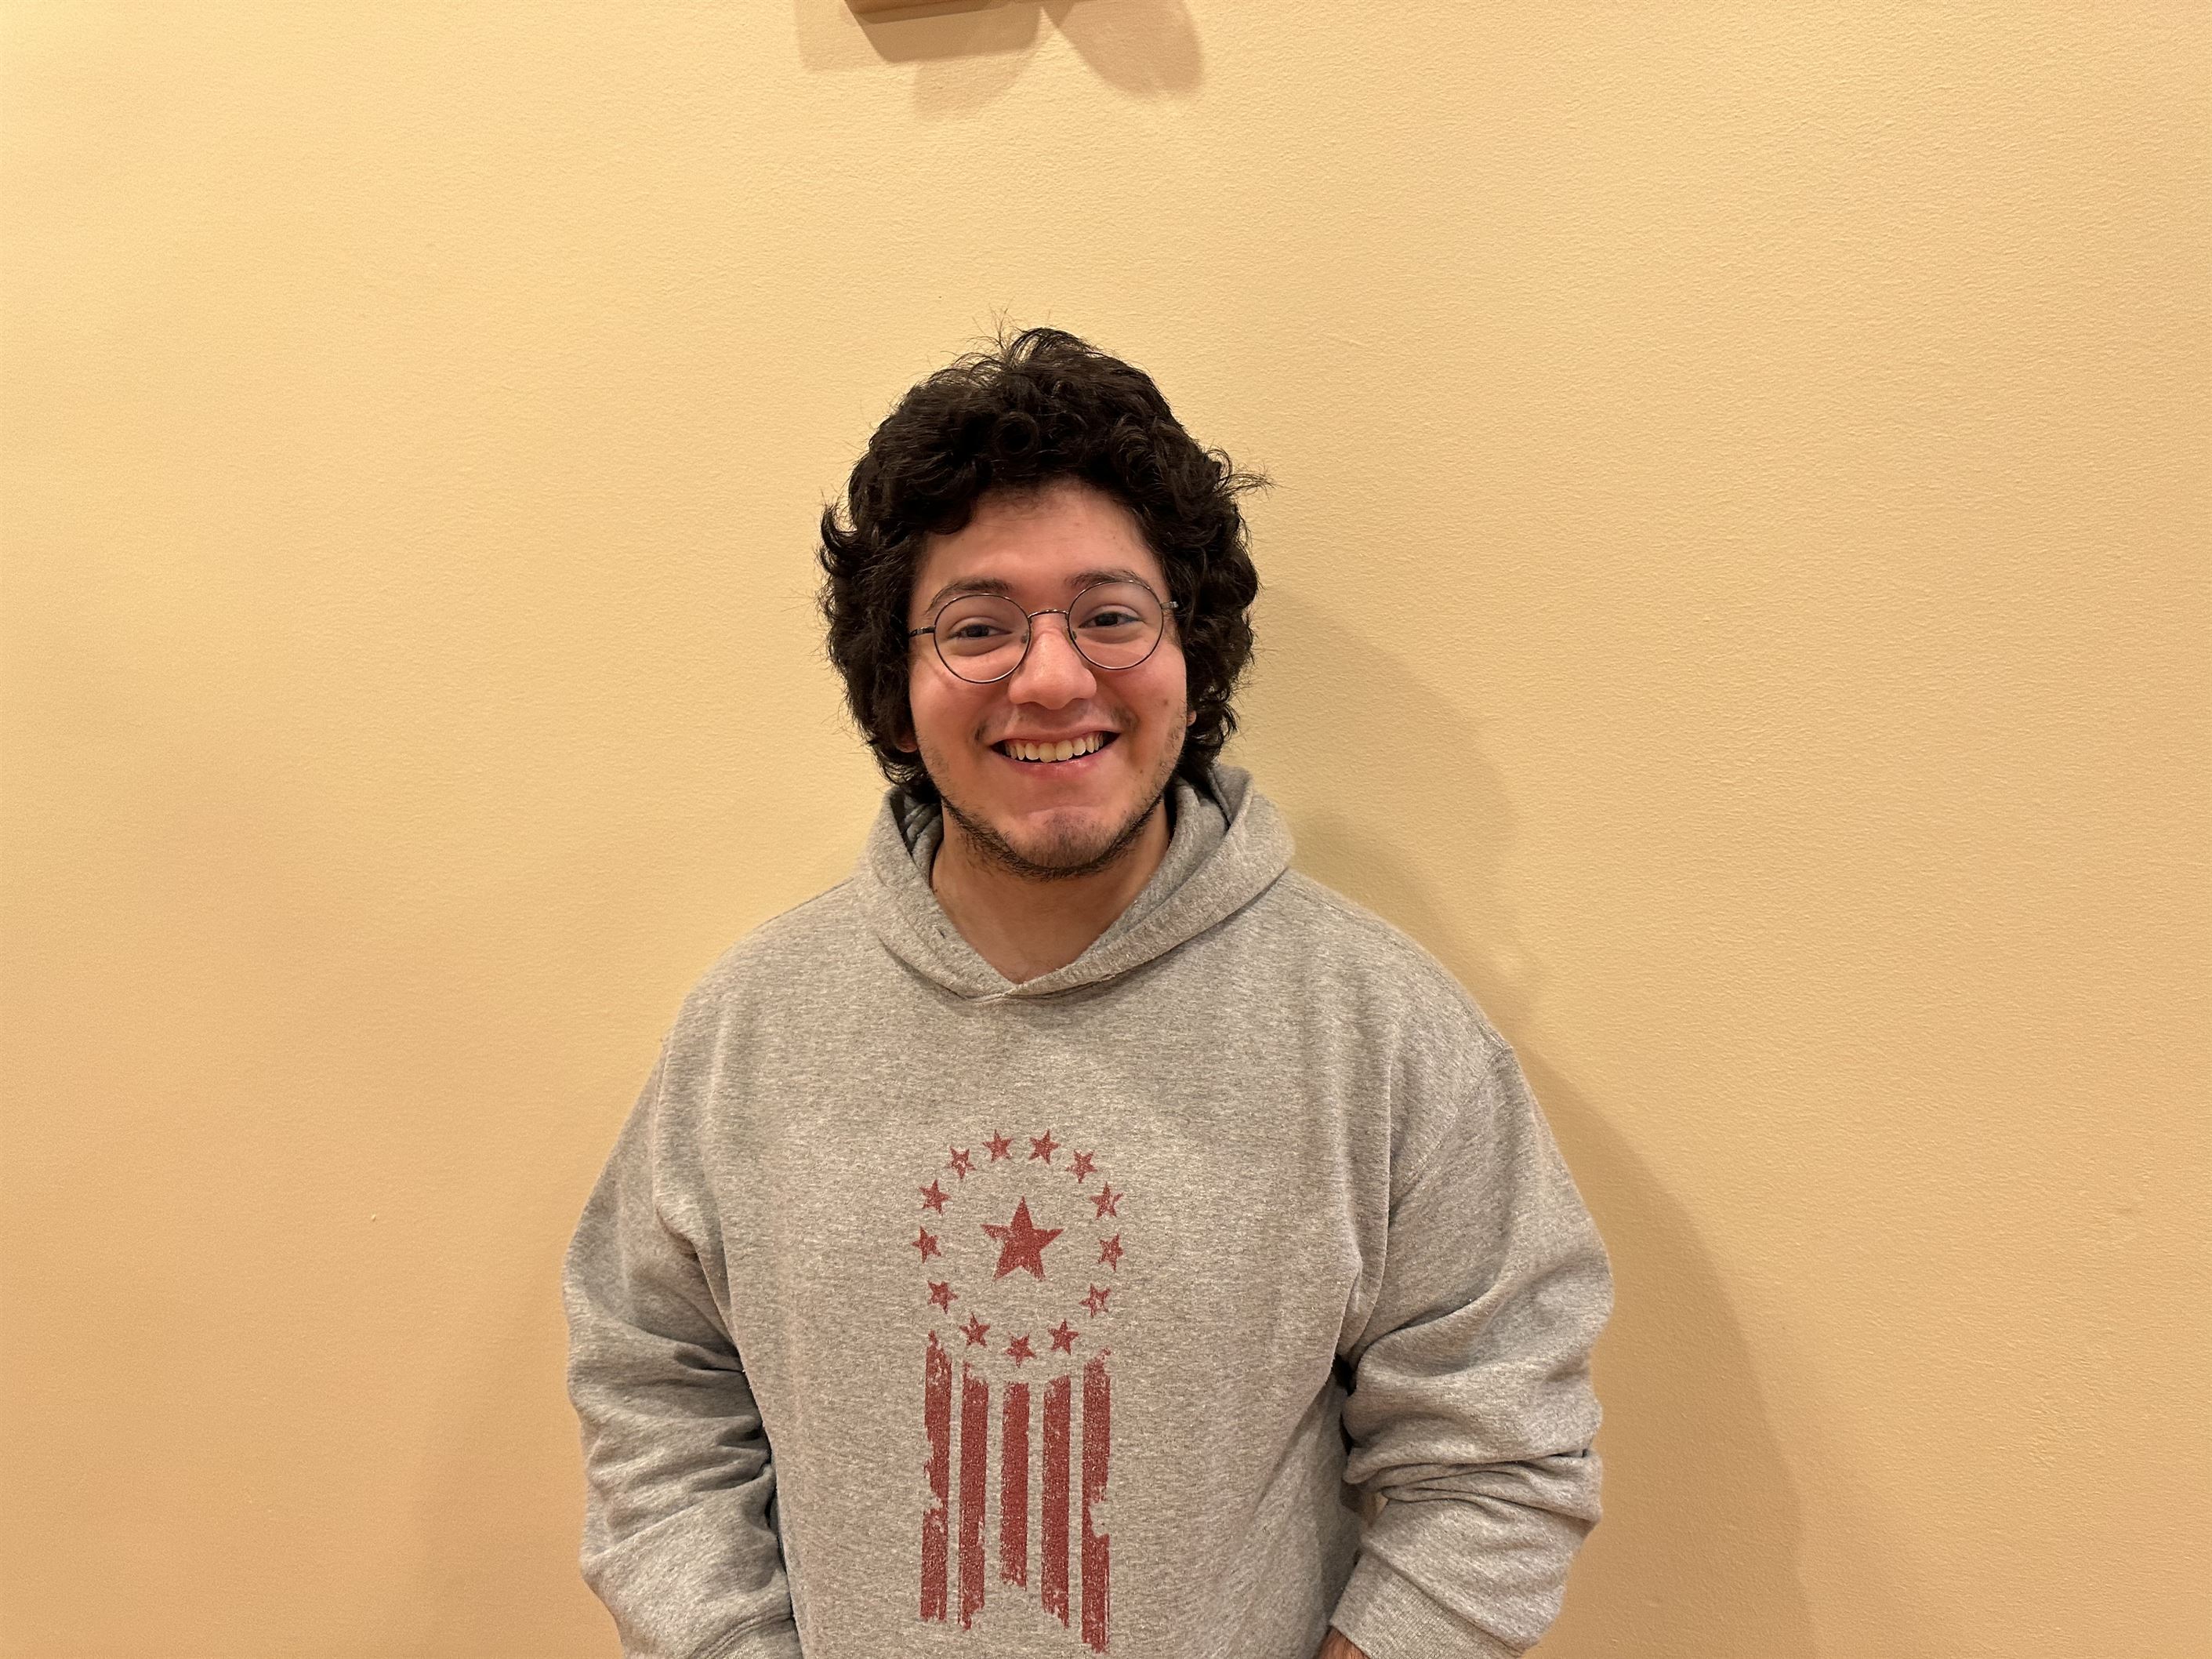 Angel Bustillo, a junior English major, says he loved the “repetition” shown throughout the performance.